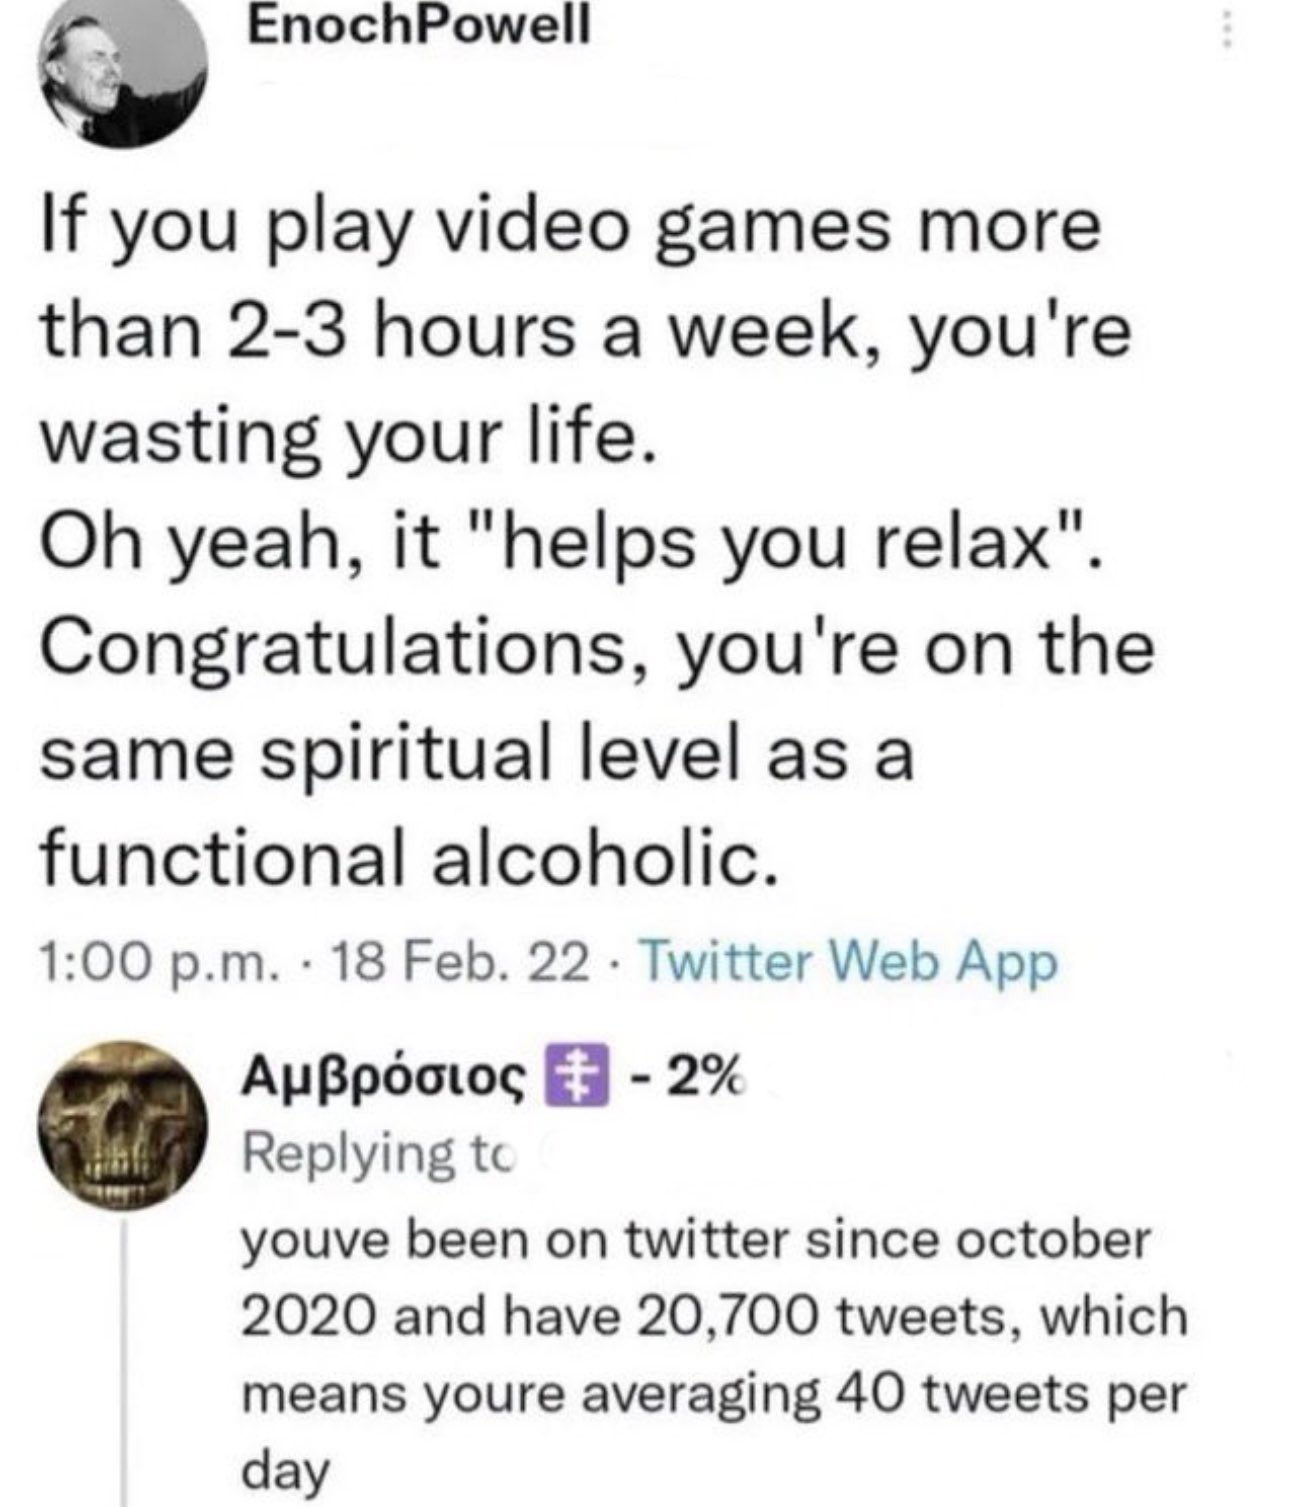 world class insults - point - EnochPowell If you play video games more than 23 hours a week, you're wasting your life. Oh yeah, it "helps you relax". Congratulations, you're on the same spiritual level as a functional alcoholic. p.m. 18 Feb. 22. Twitter W